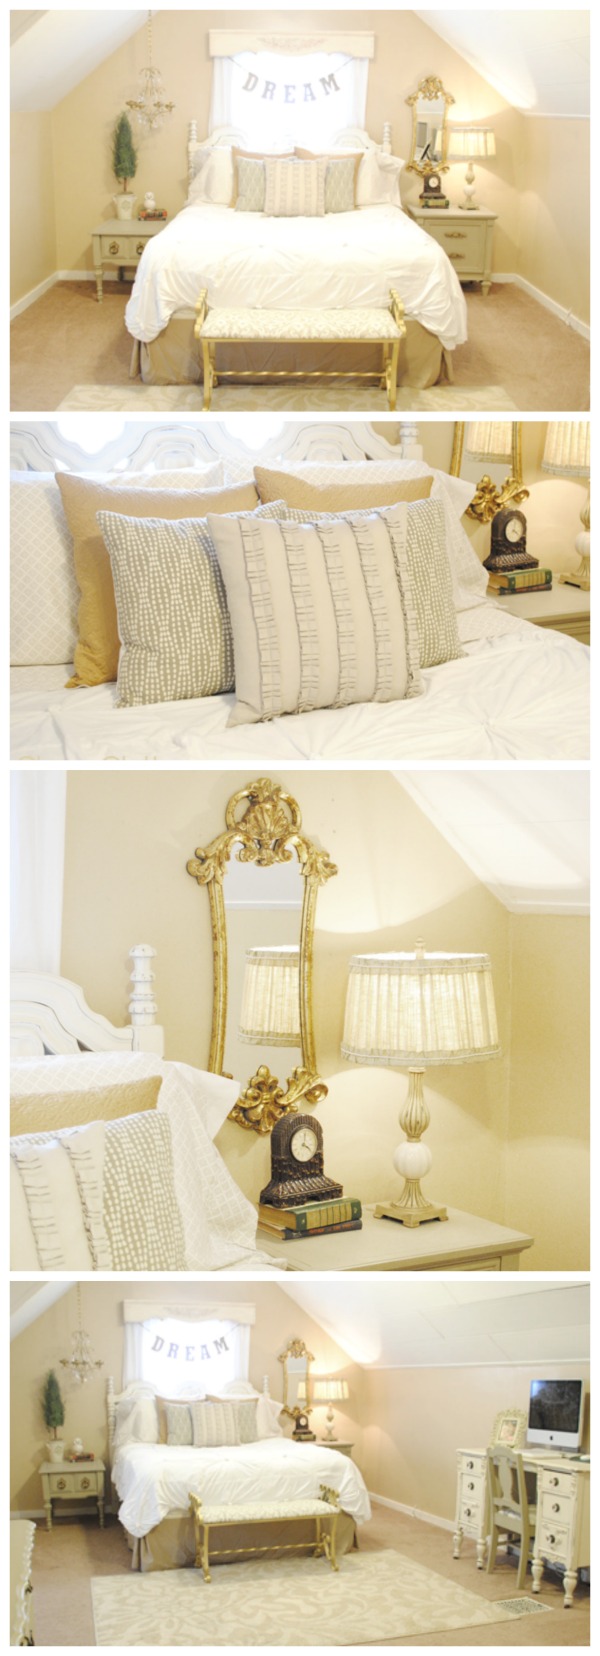 Gorgeous Master Bedroom Makeover - Love the neutrals and gold accents! | www.classyclutter.net